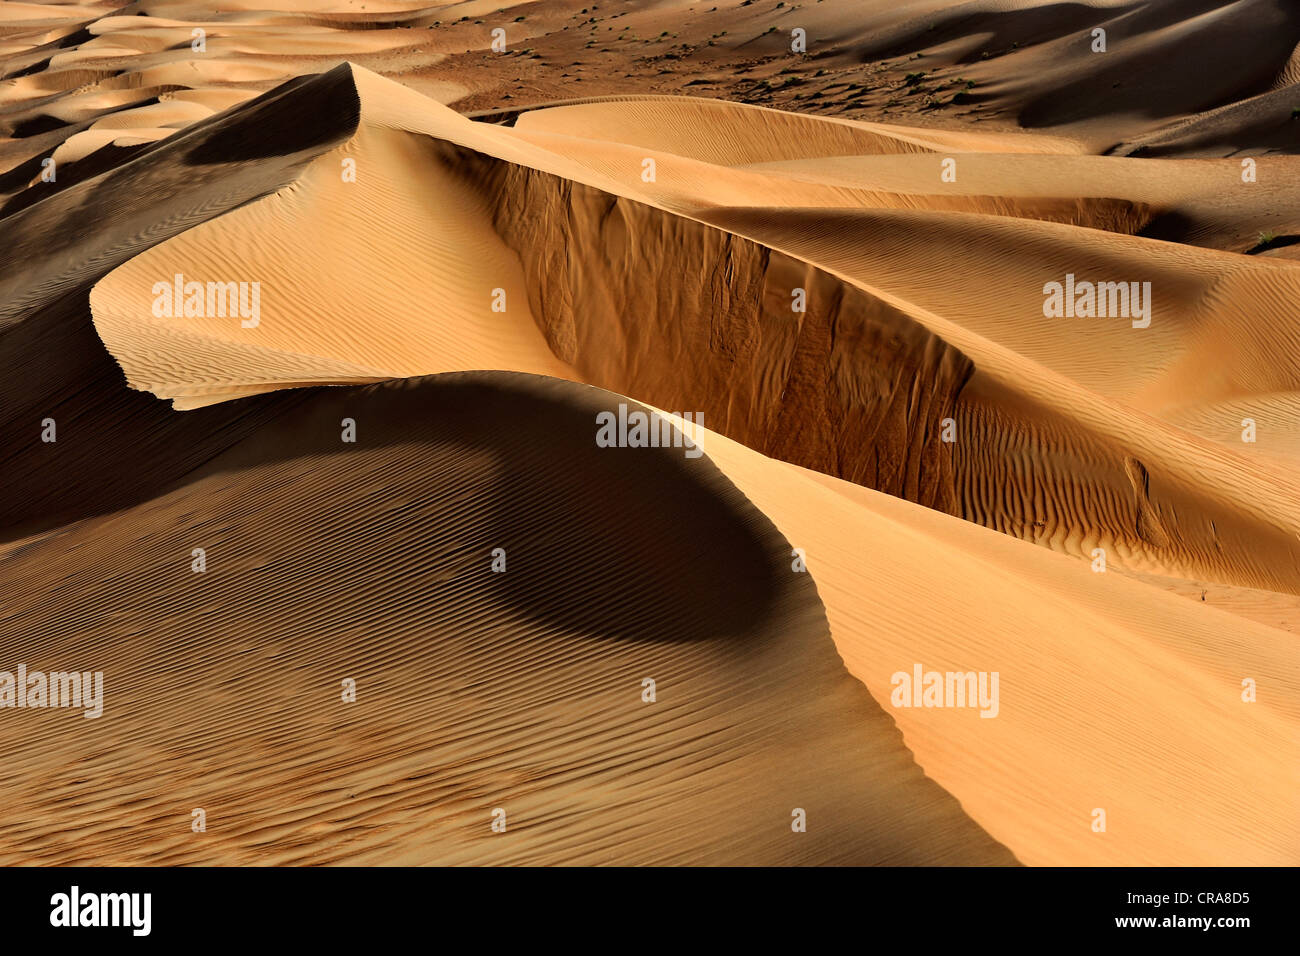 Finely structured dunes in the Wahiba Sands desert in Oman, Middle East Stock Photo